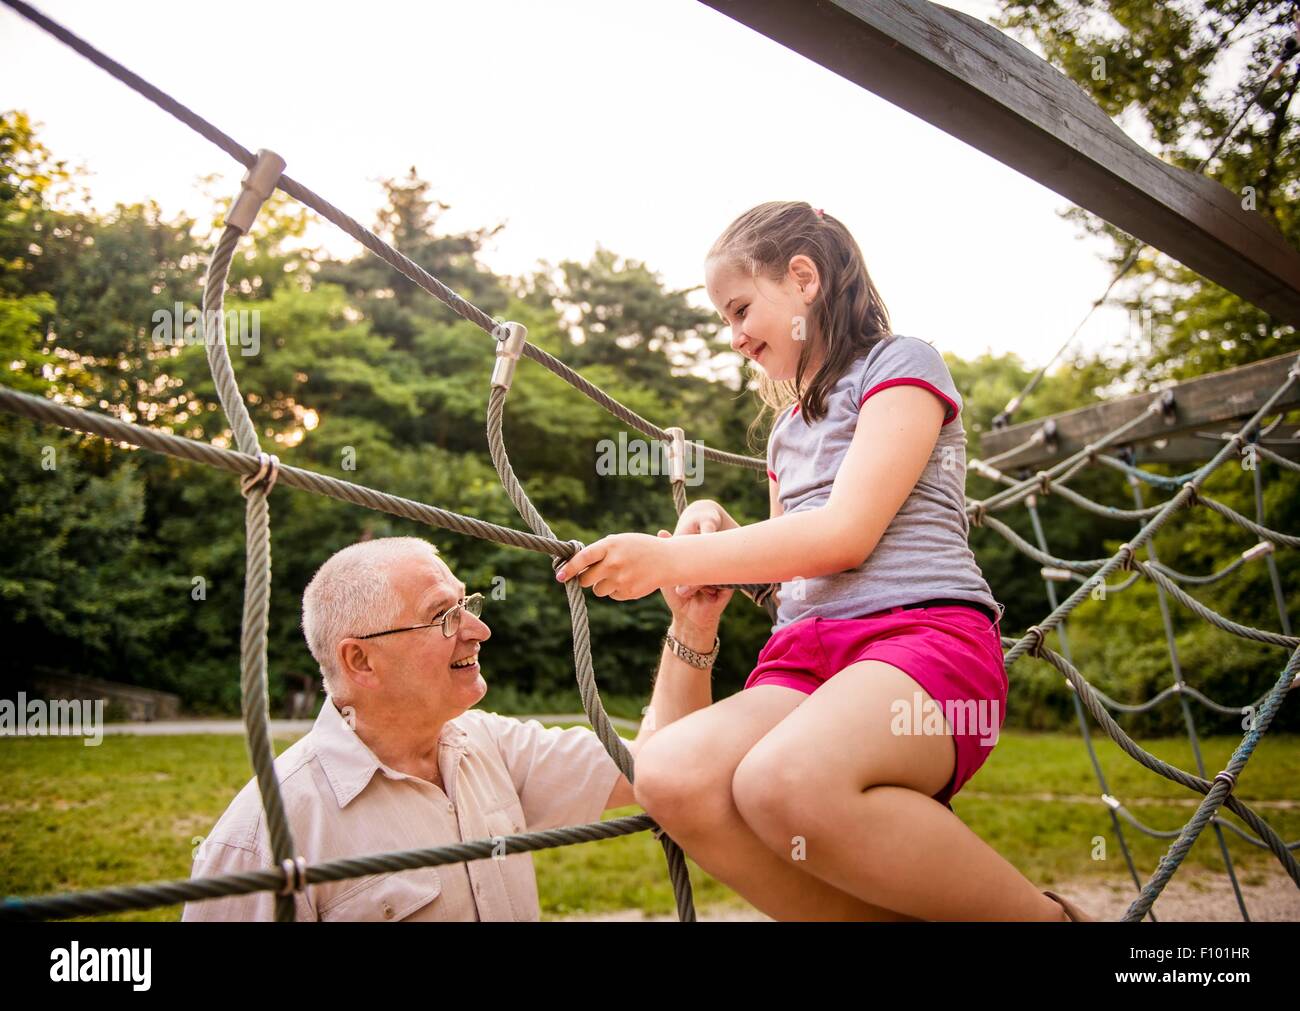 Smiling child sitting on playground net with her grandfather Stock Photo